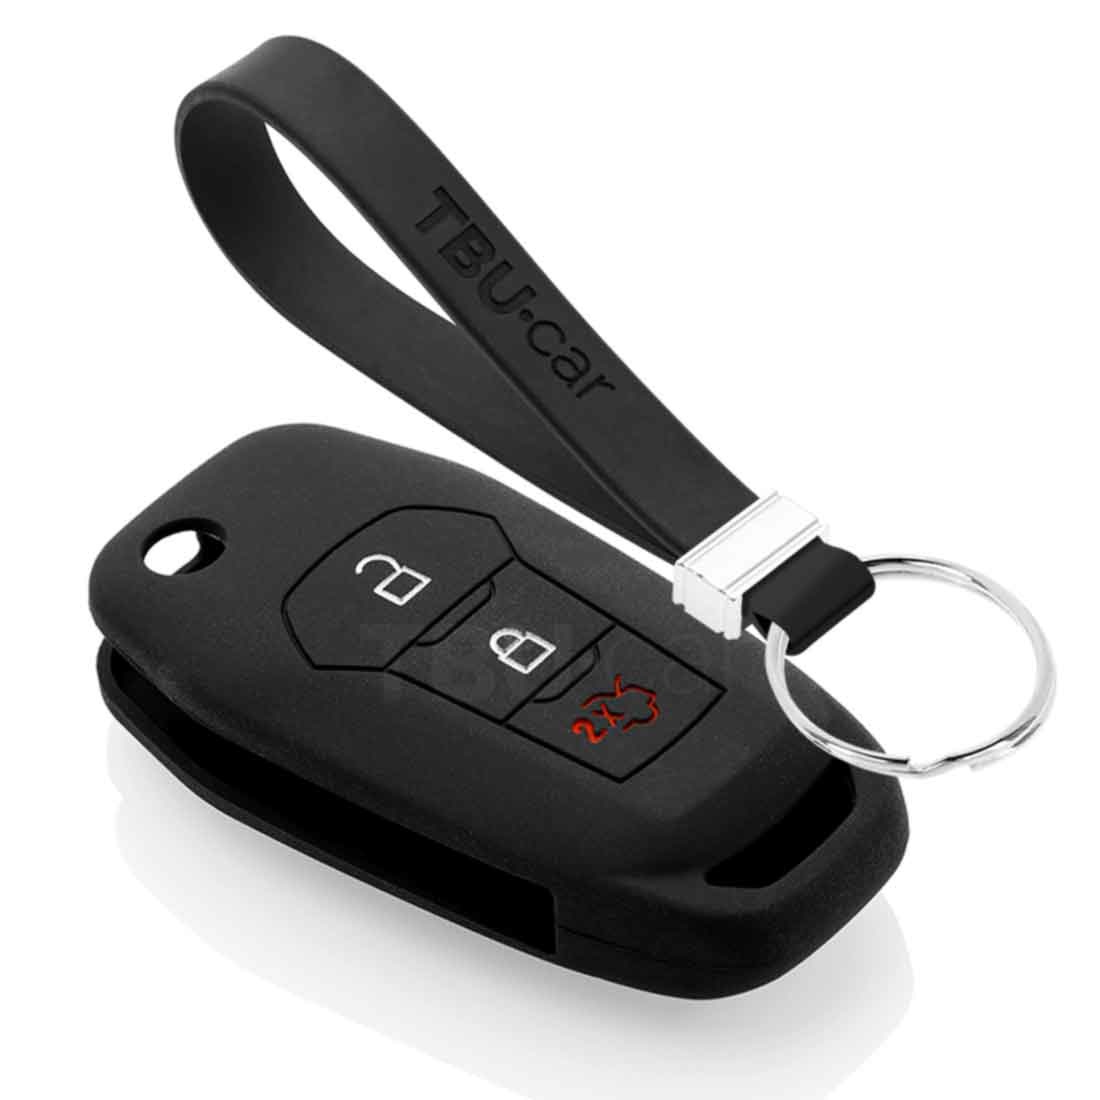 TBU car TBU car Car key cover compatible with Ford - Silicone Protective Remote Key Shell - FOB Case Cover - Black